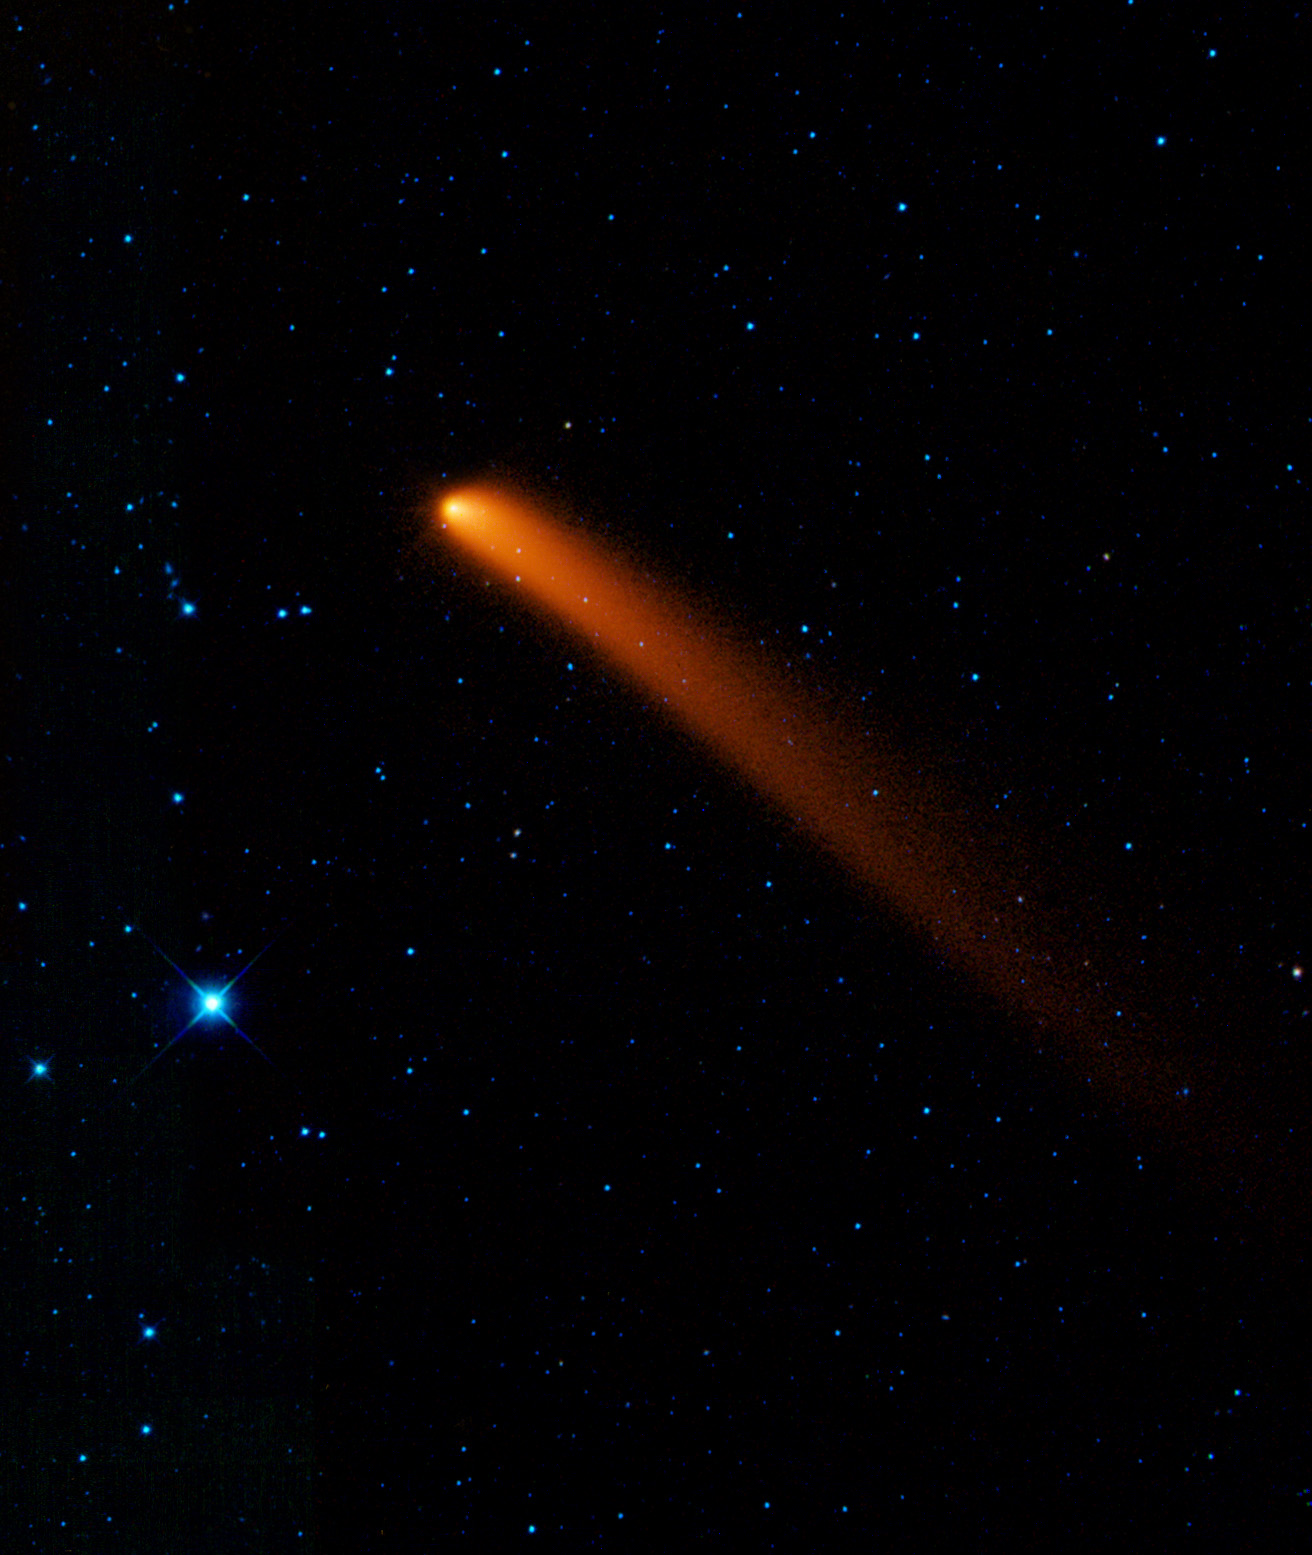 WISE Infrared View of Comet Siding Spring